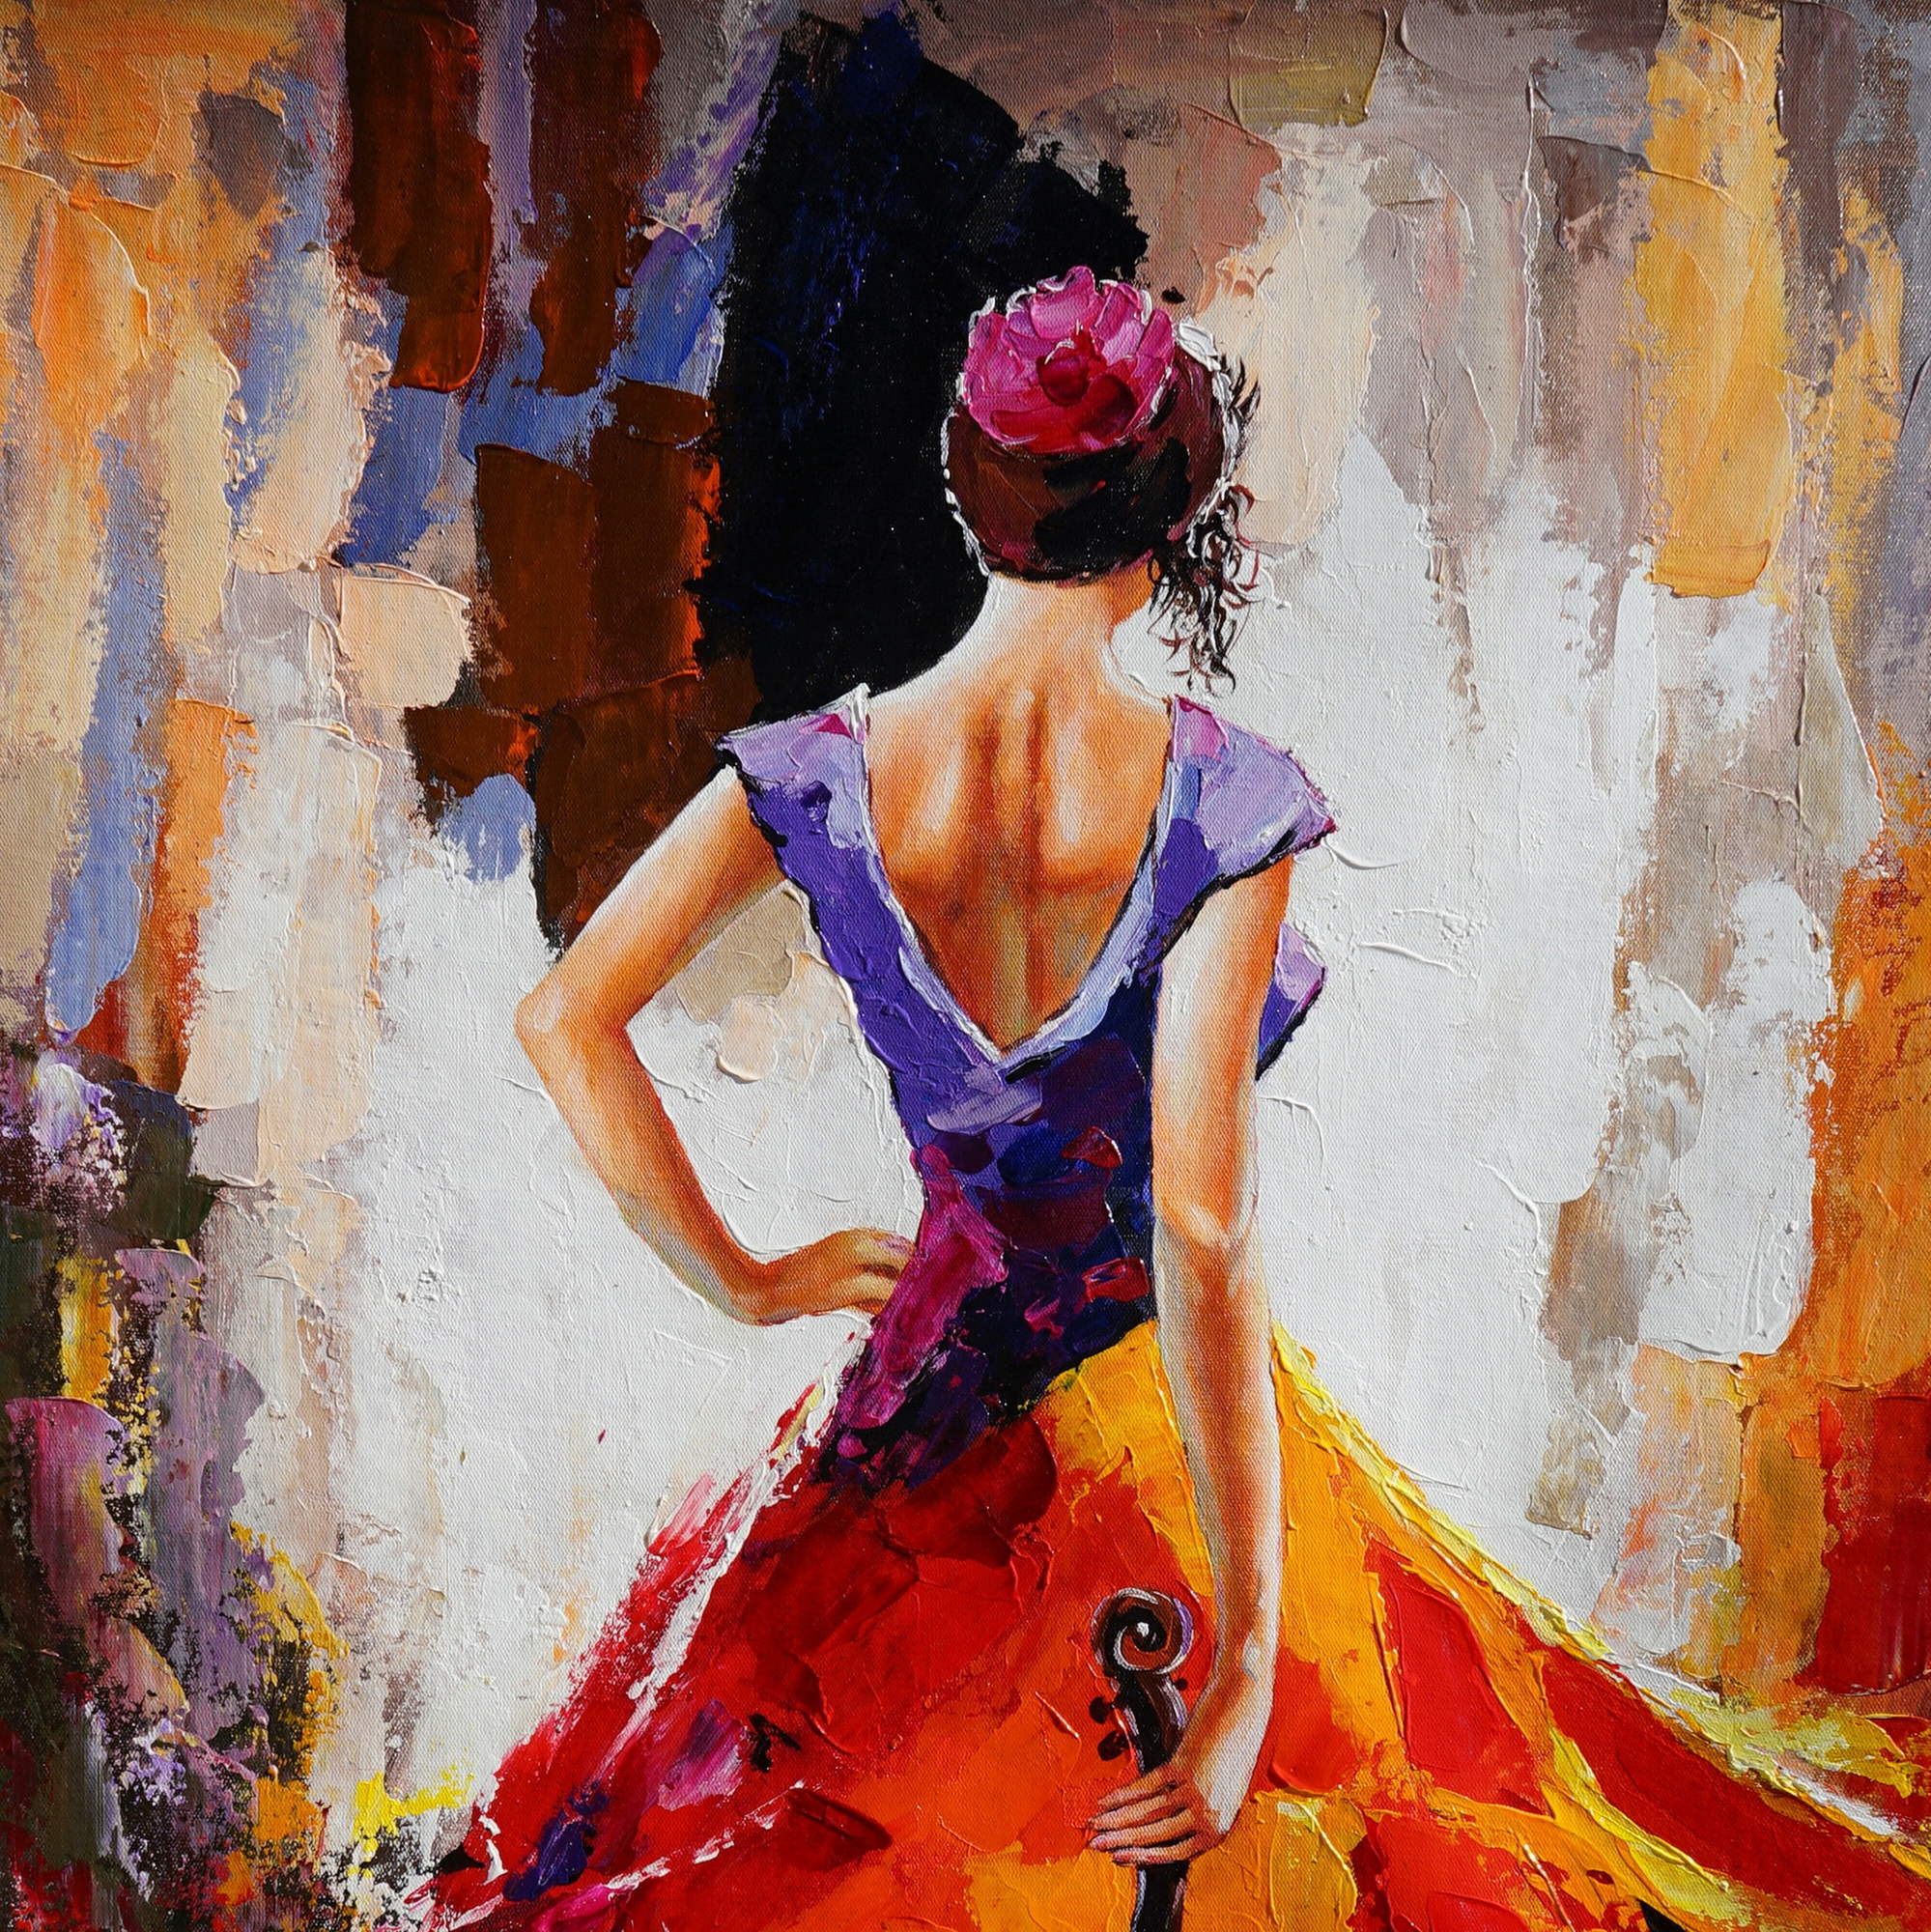 Abstract painting Violinist in red dress 75x100cm